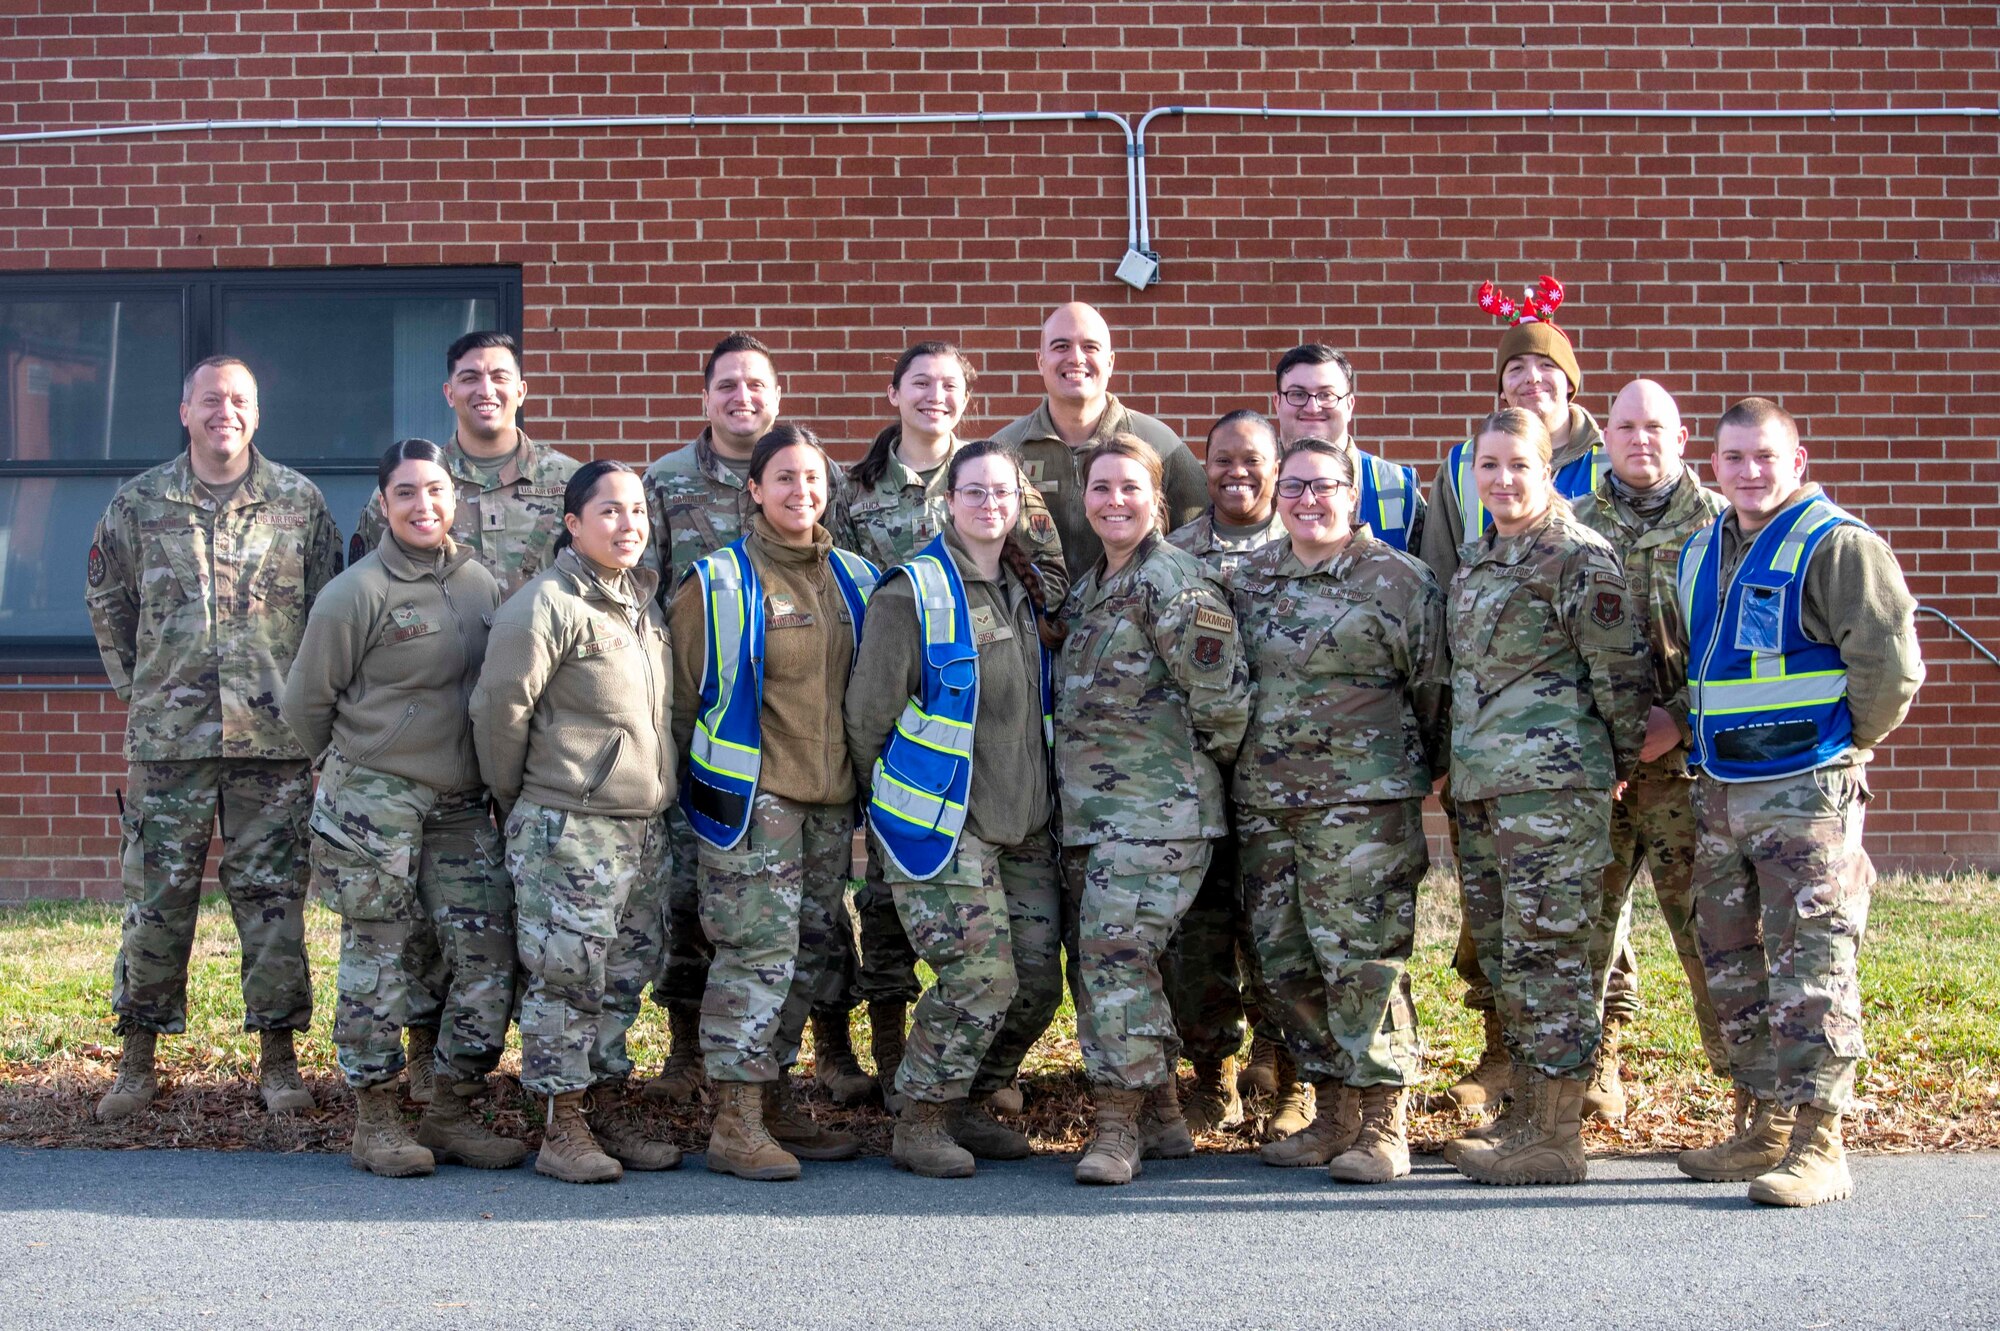 Chief Master Sgt. Dawn Teachworth, Village 1 senior enlisted leader poses for a photo with her team in Liberty Village on Joint Base McGuire-Dix-Lakehurst, New Jersey, December 16, 2021.